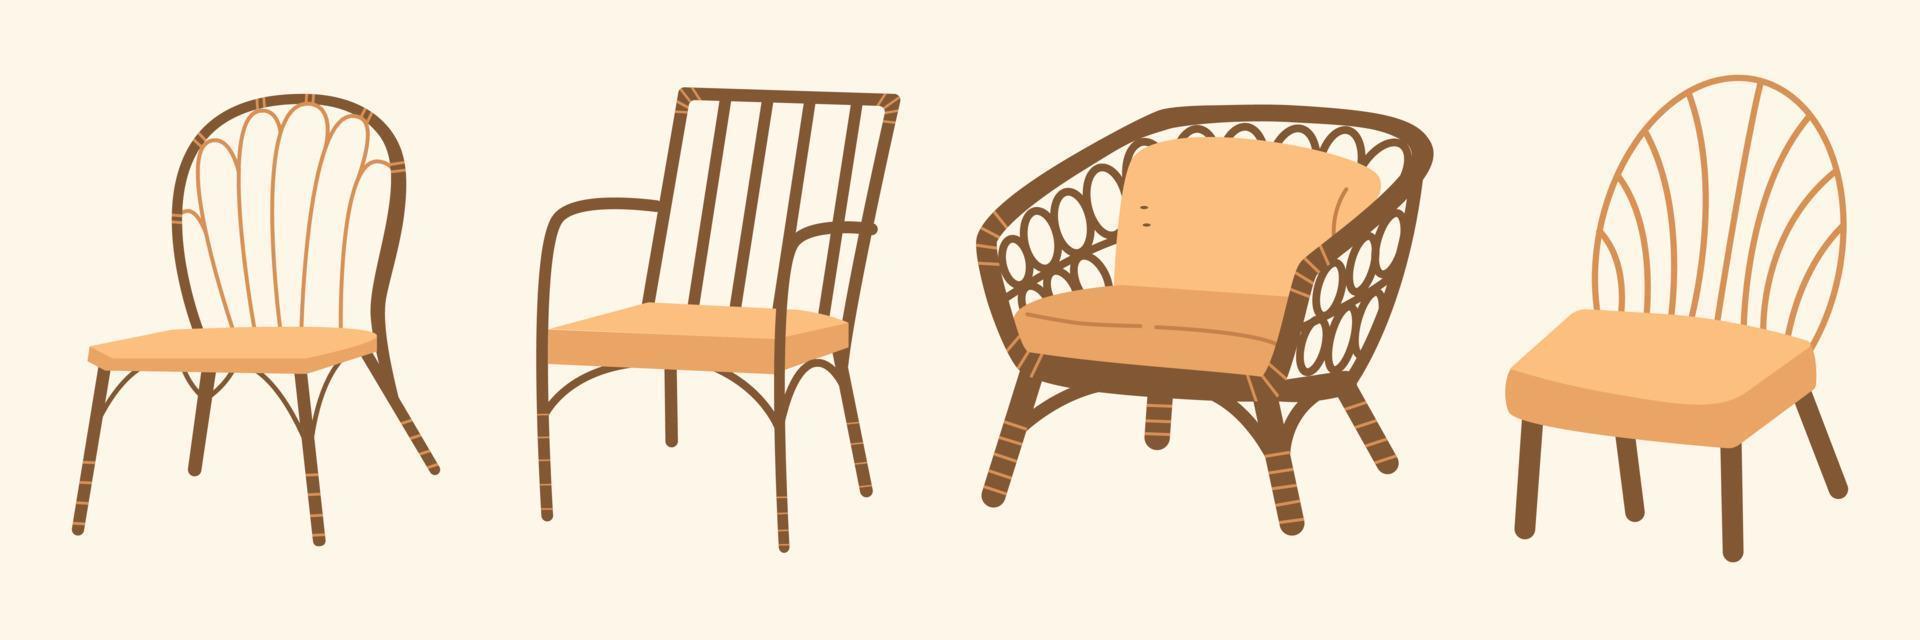 vintage furniture in boho design style. Bohemian illustration for design elements. classic style antique chairs vector